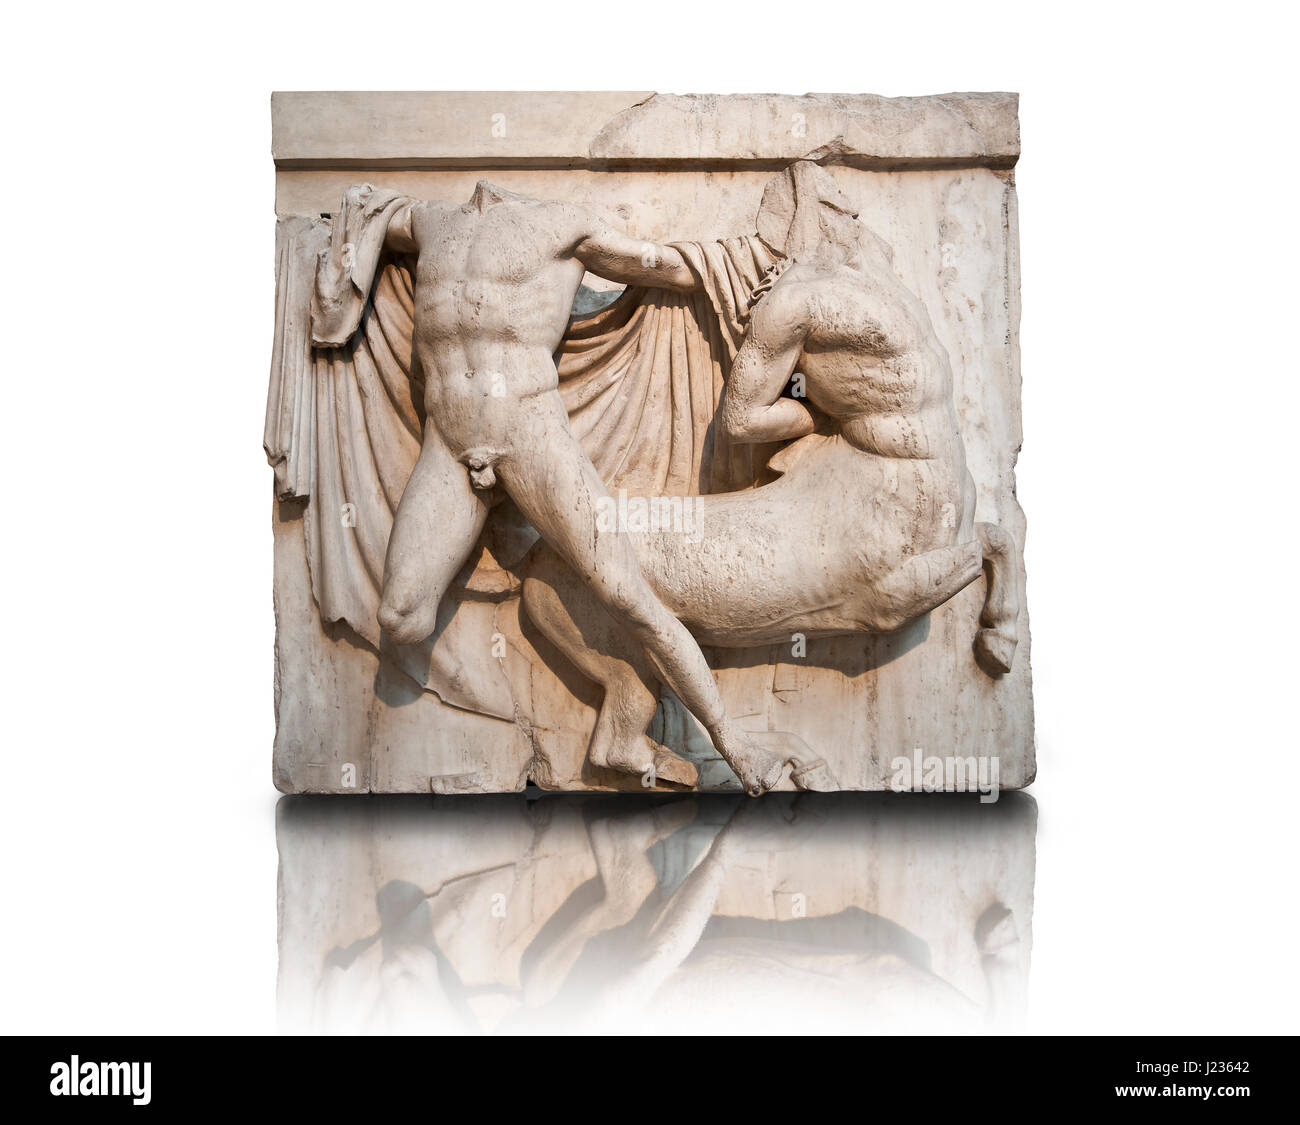 Sculpture of Lapiths and  Centaurs battling from the Metope of the Parthenon on the Acropolis of Athens no XXVII. Also known as the Elgin marbles. Bri Stock Photo